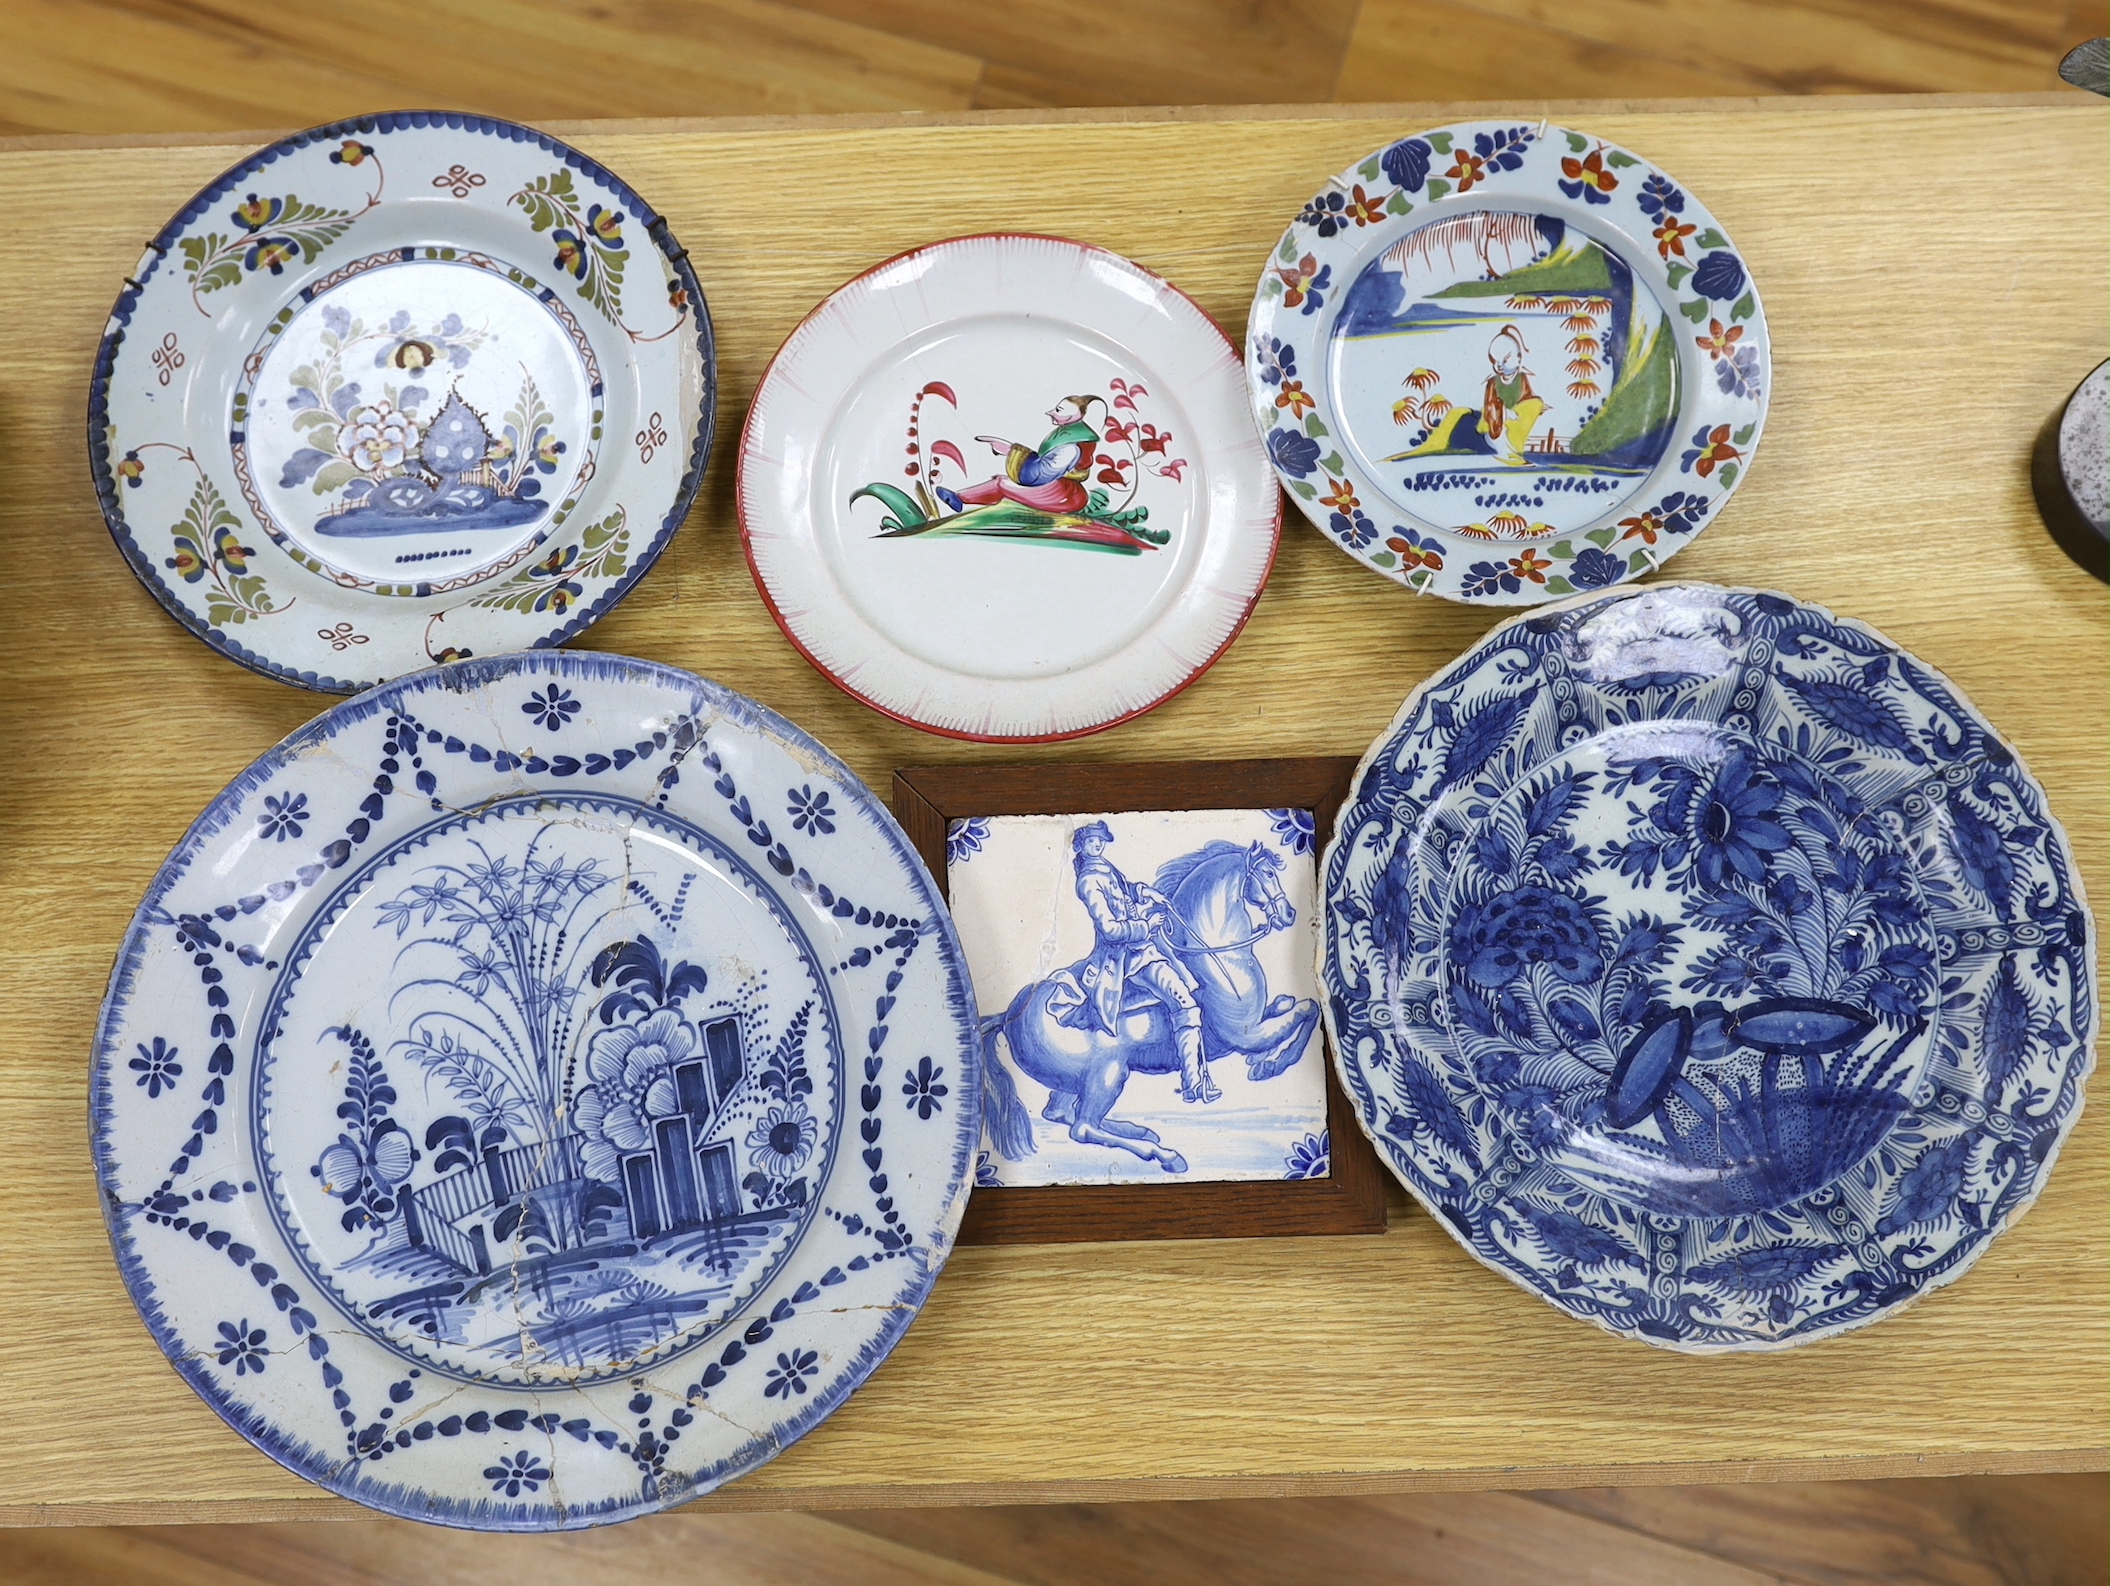 Two 18th century Delft blue and white dishes, a Delft polychrome dish, an English delftware plate, a